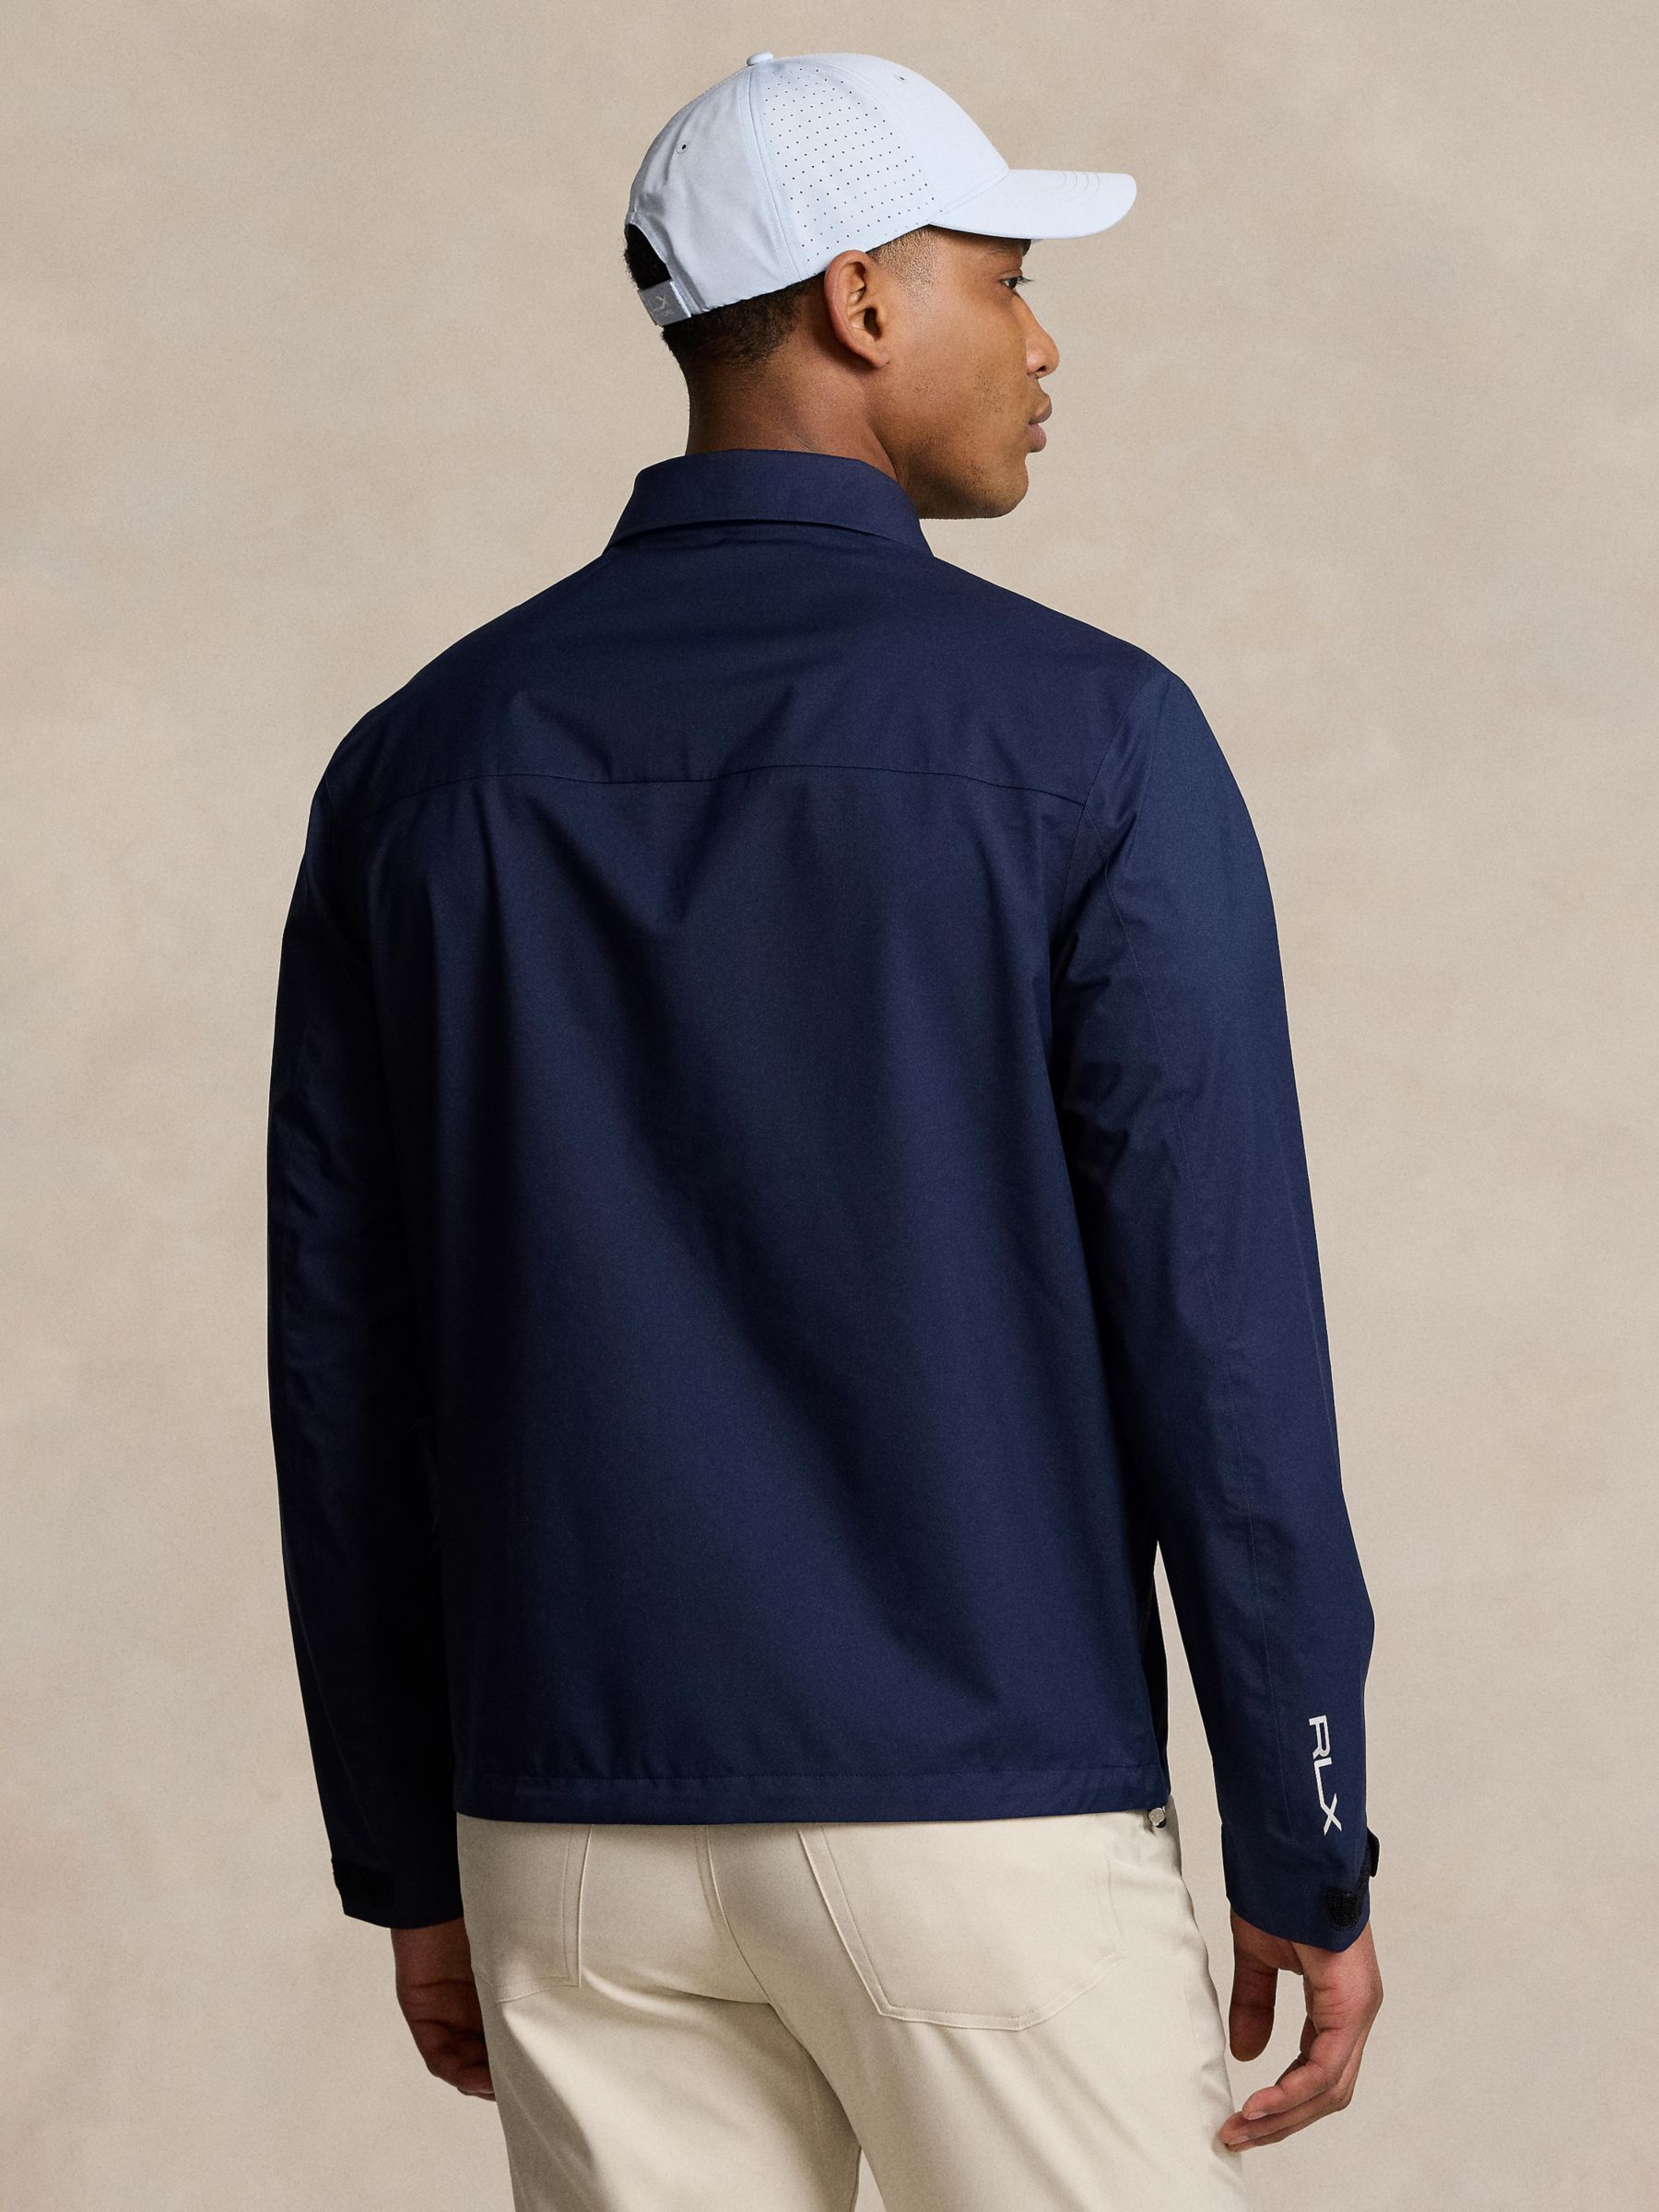 Polo Golf by Ralph Lauren Water Repellent Twill Jacket, Navy at